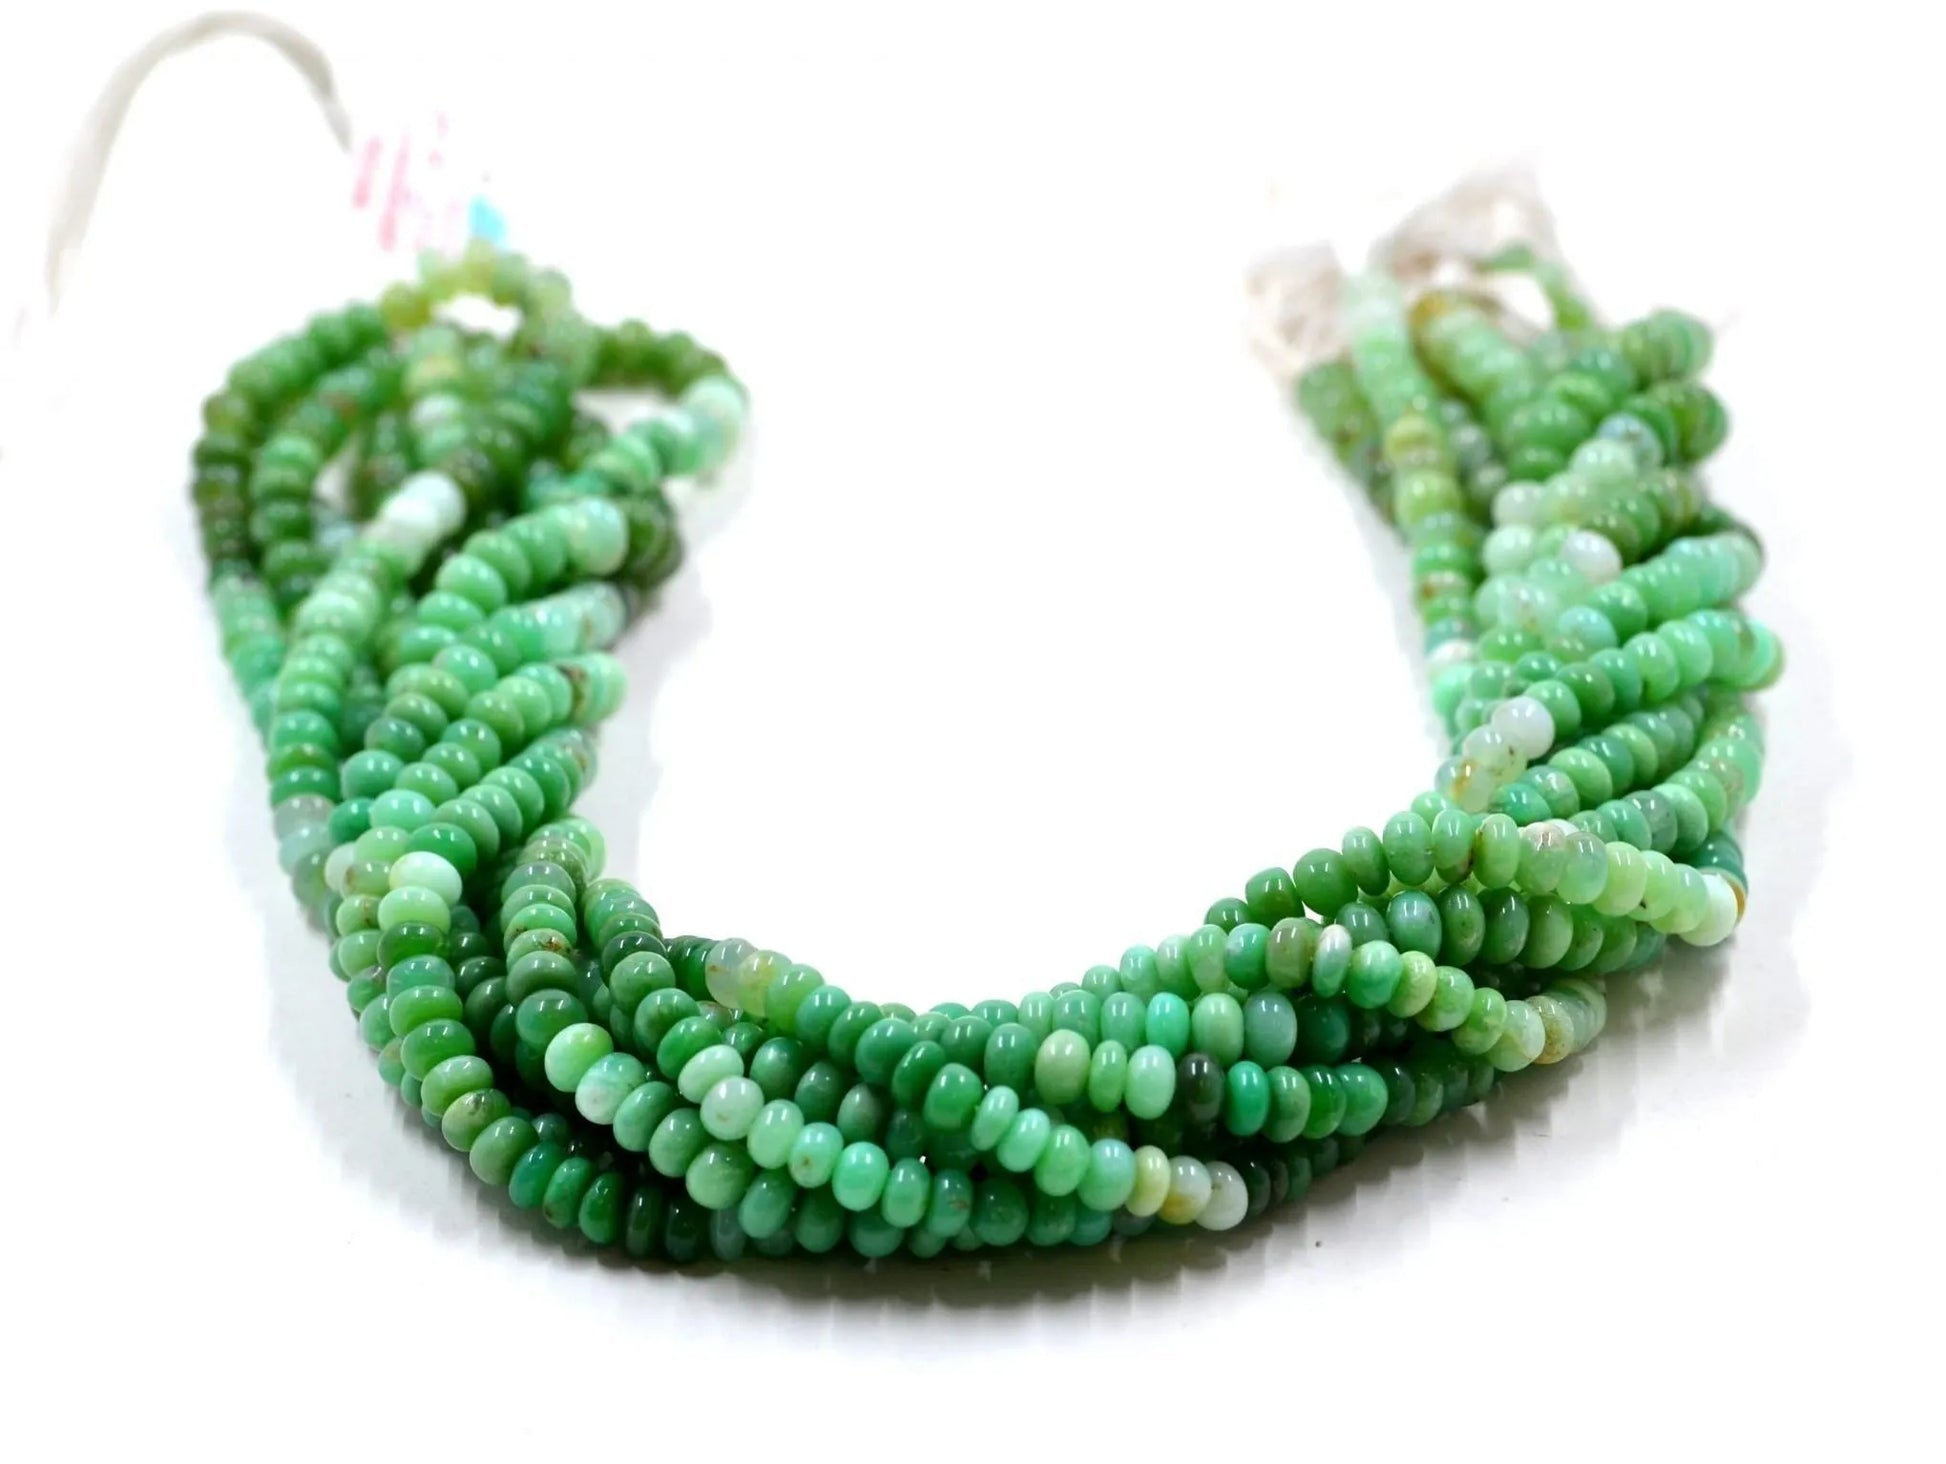 Shaded Chrysoprase Beads